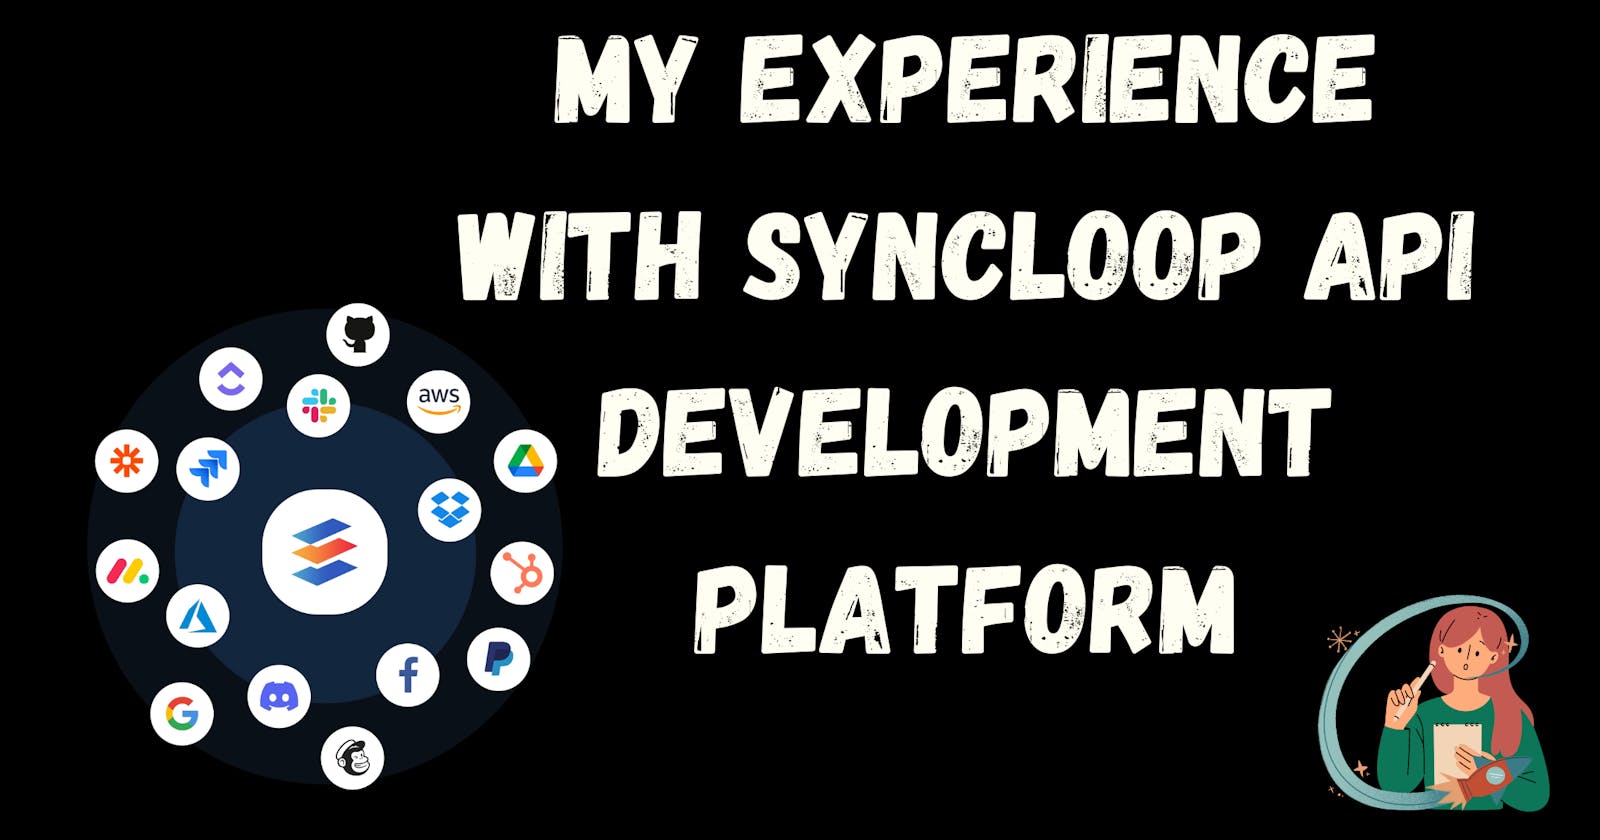 My Experience with Syncloop API Development Platform